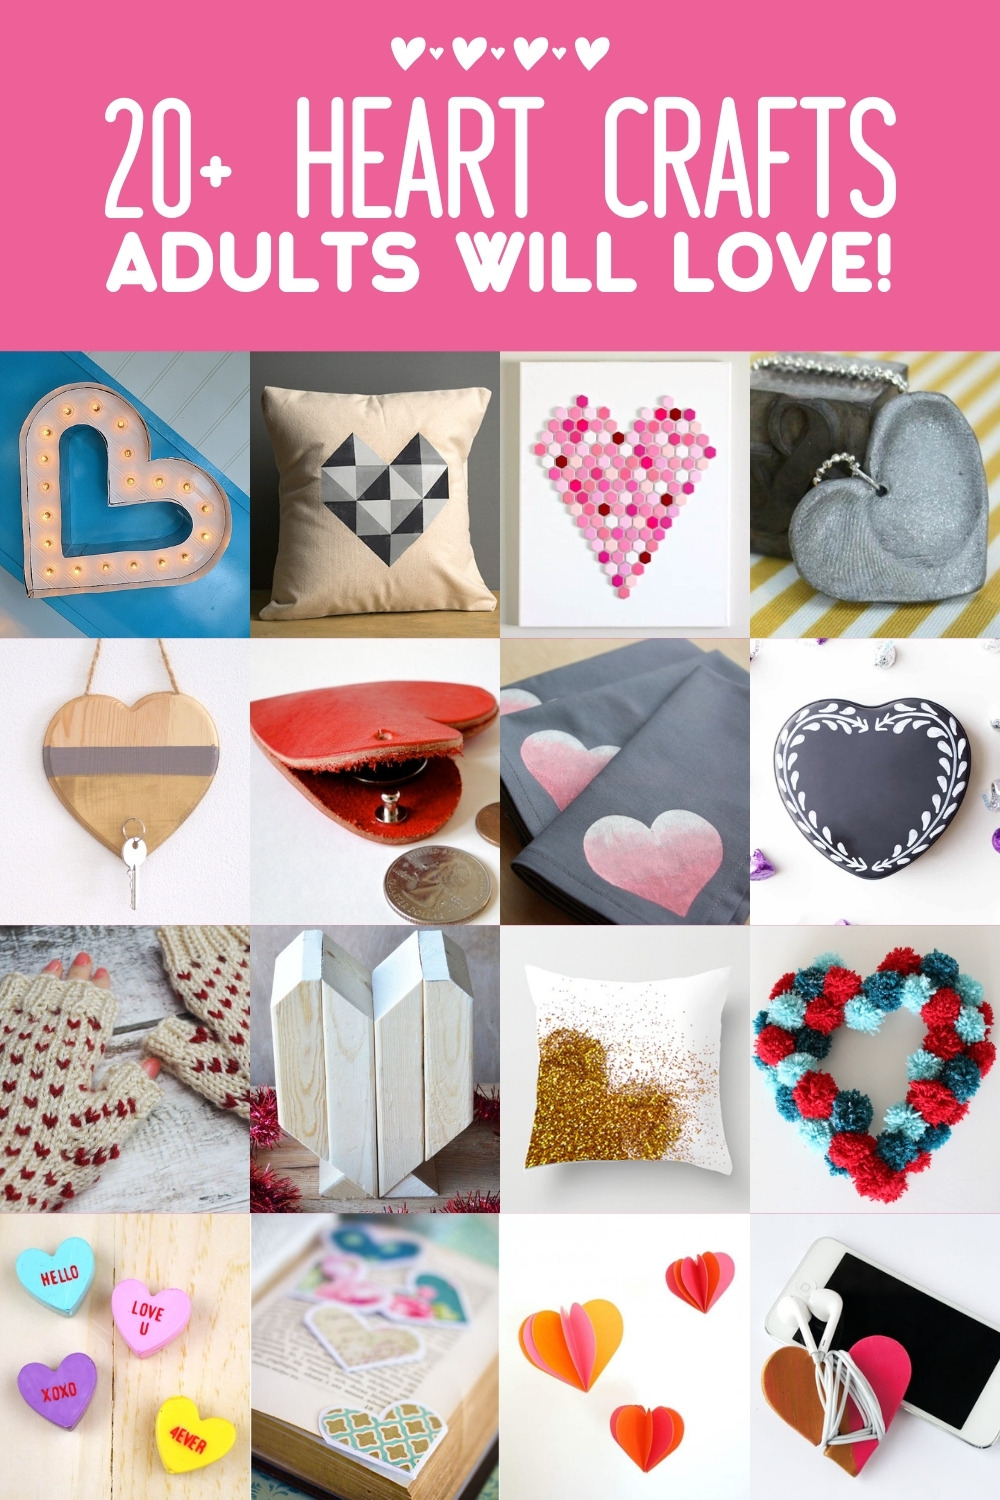 Heart Crafts Adults Will Love